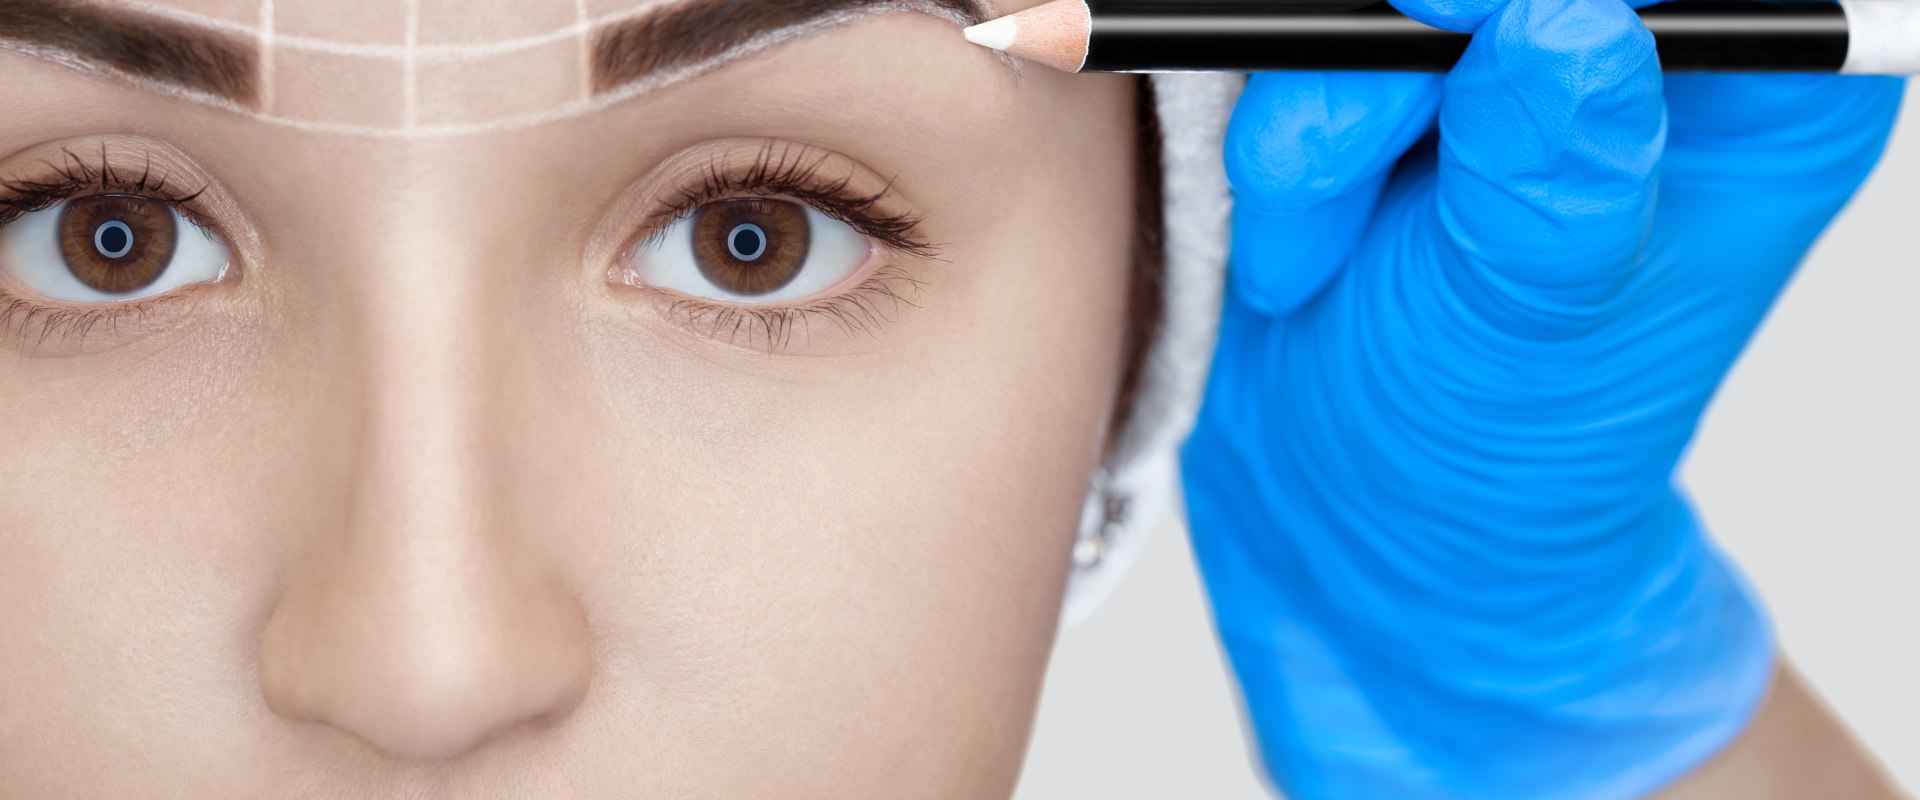 Does microblading anesthetic cream hurt?